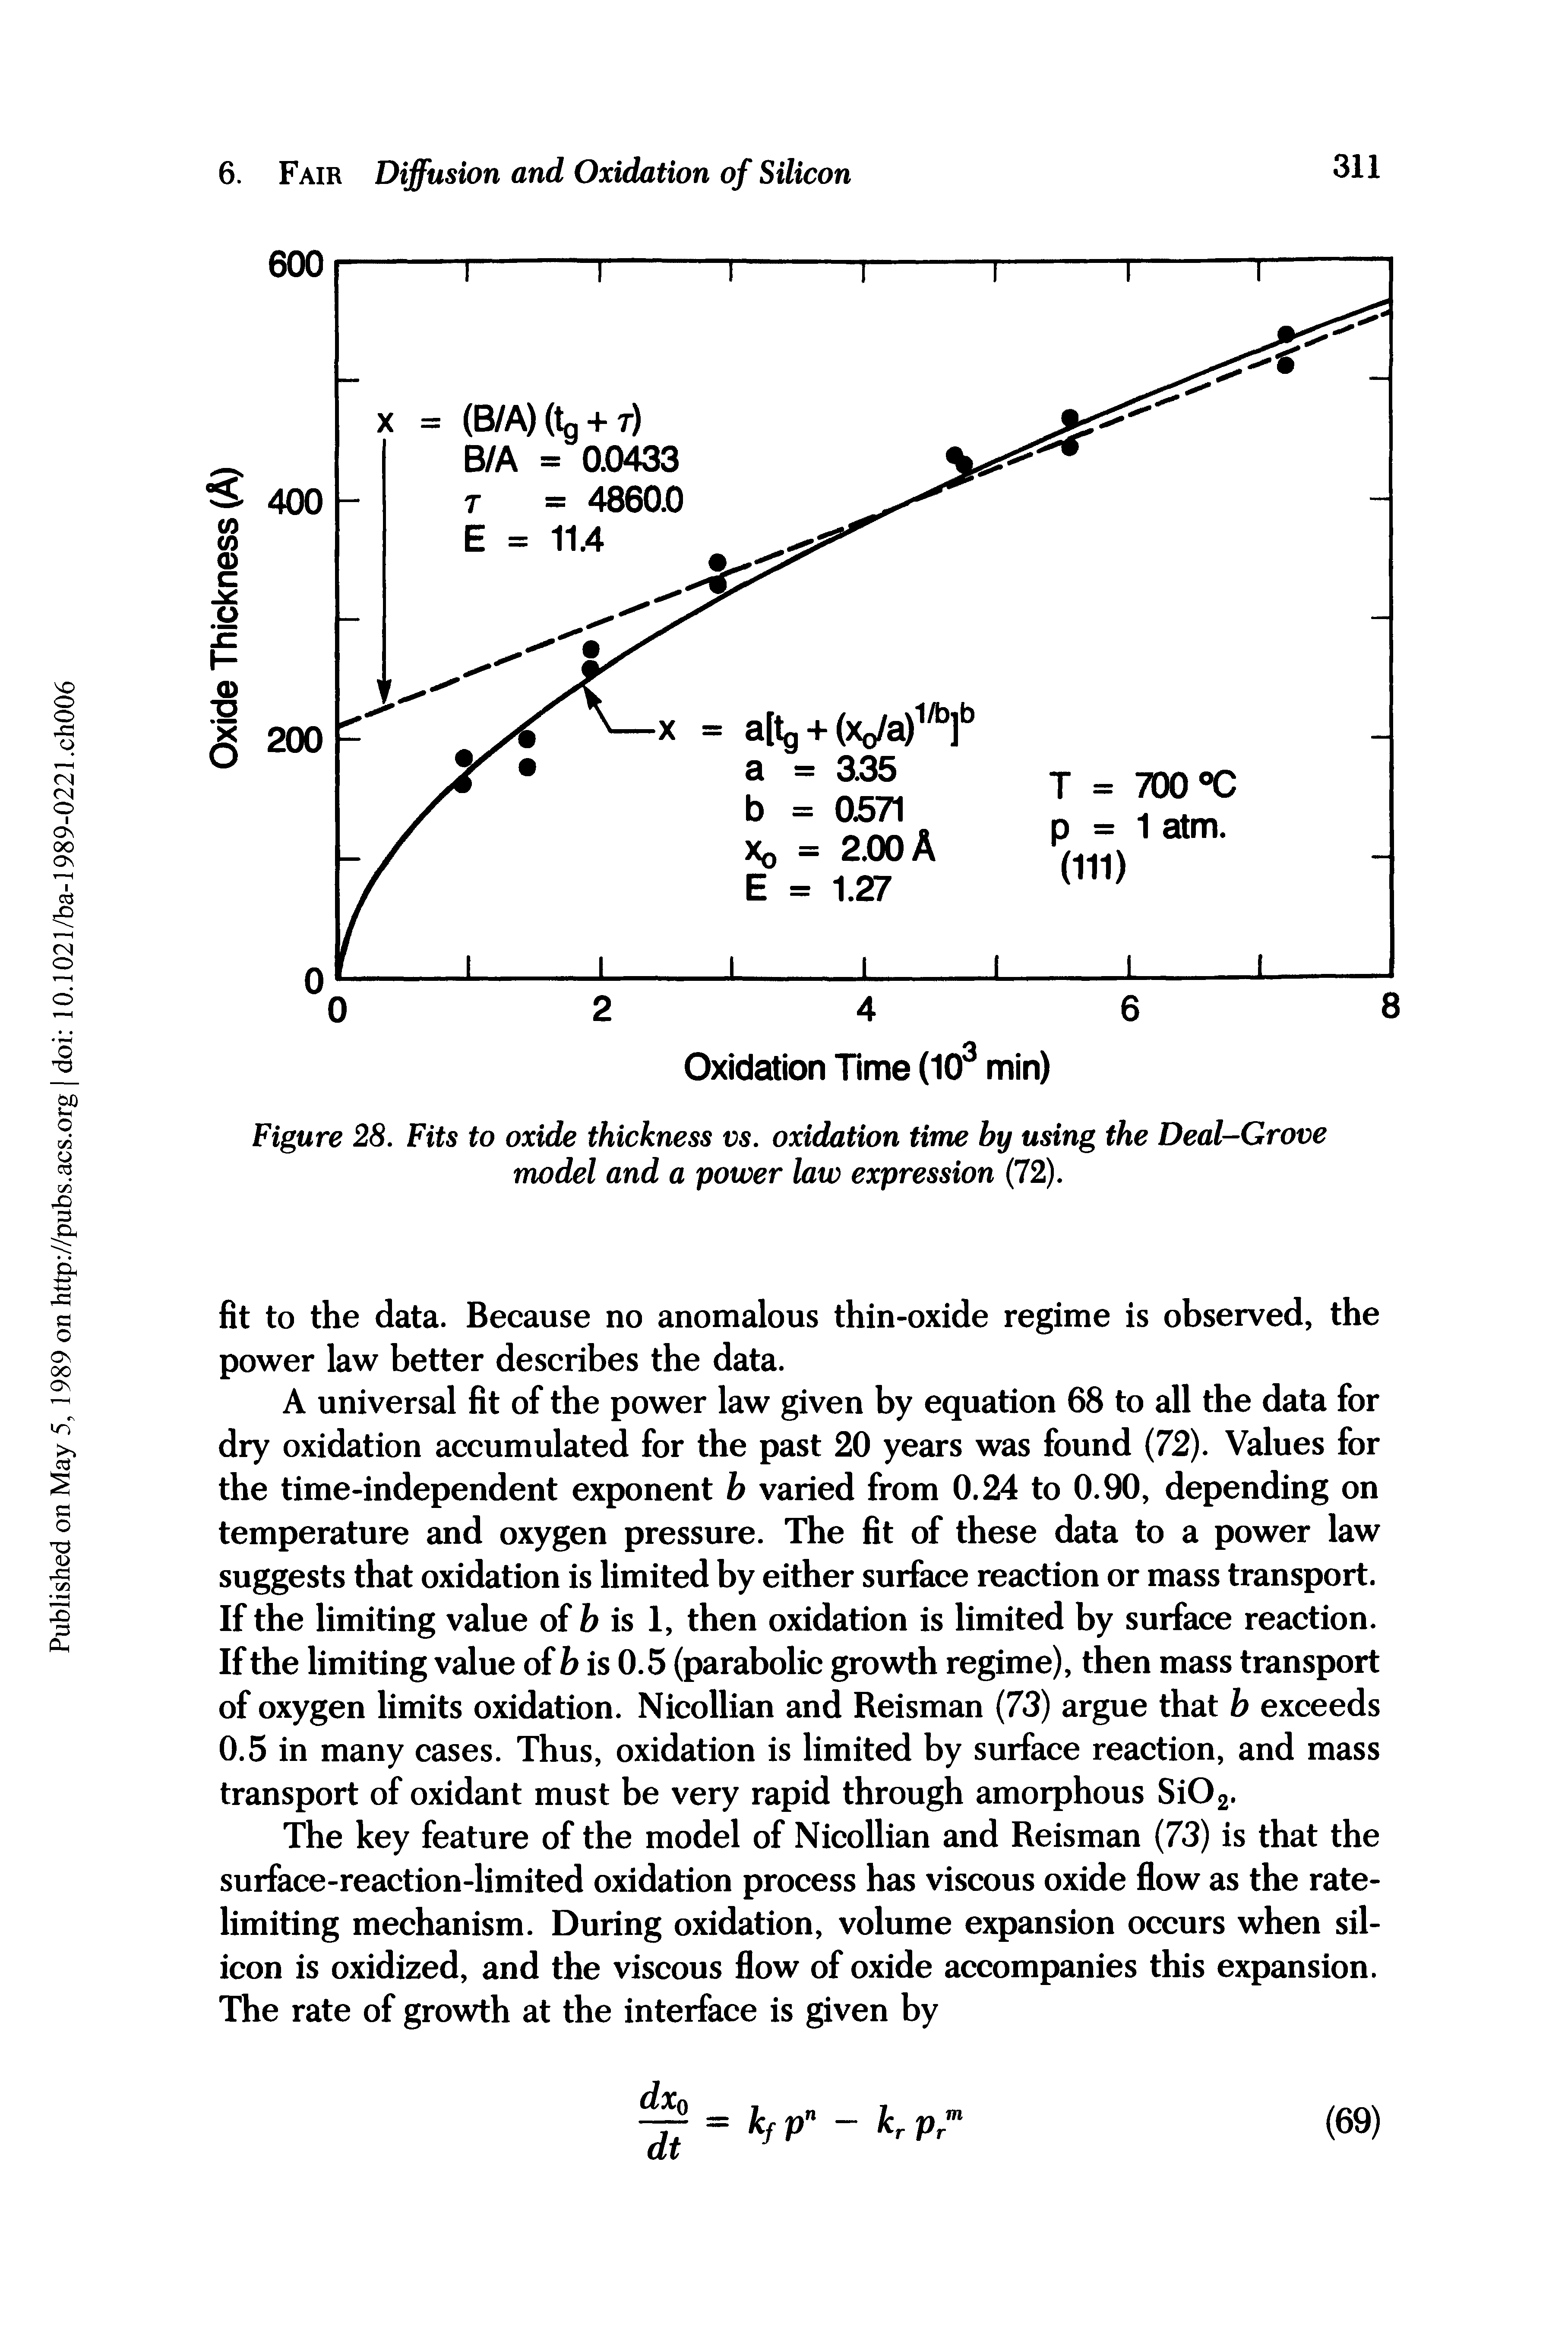 Figure 28. Fits to oxide thickness vs. oxidation time by using the Deal-Grove model and a power law expression (72).